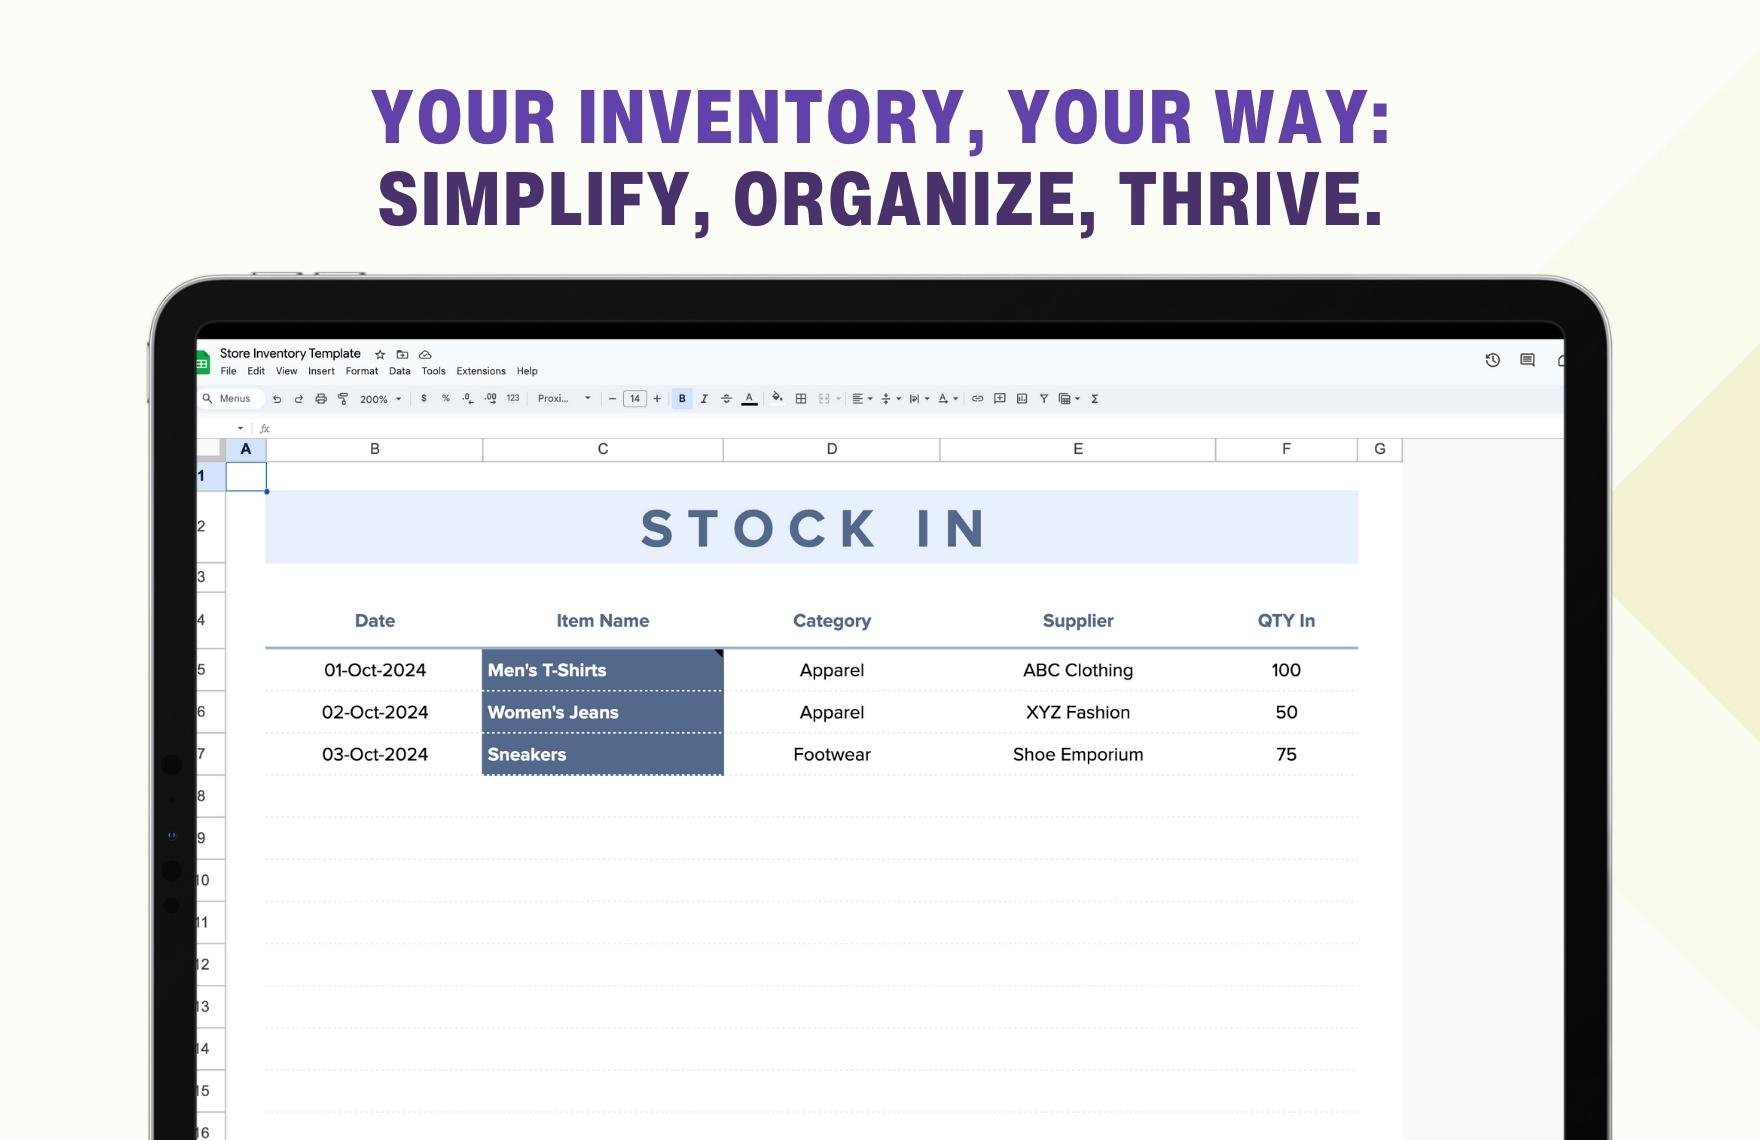 Store Inventory Template